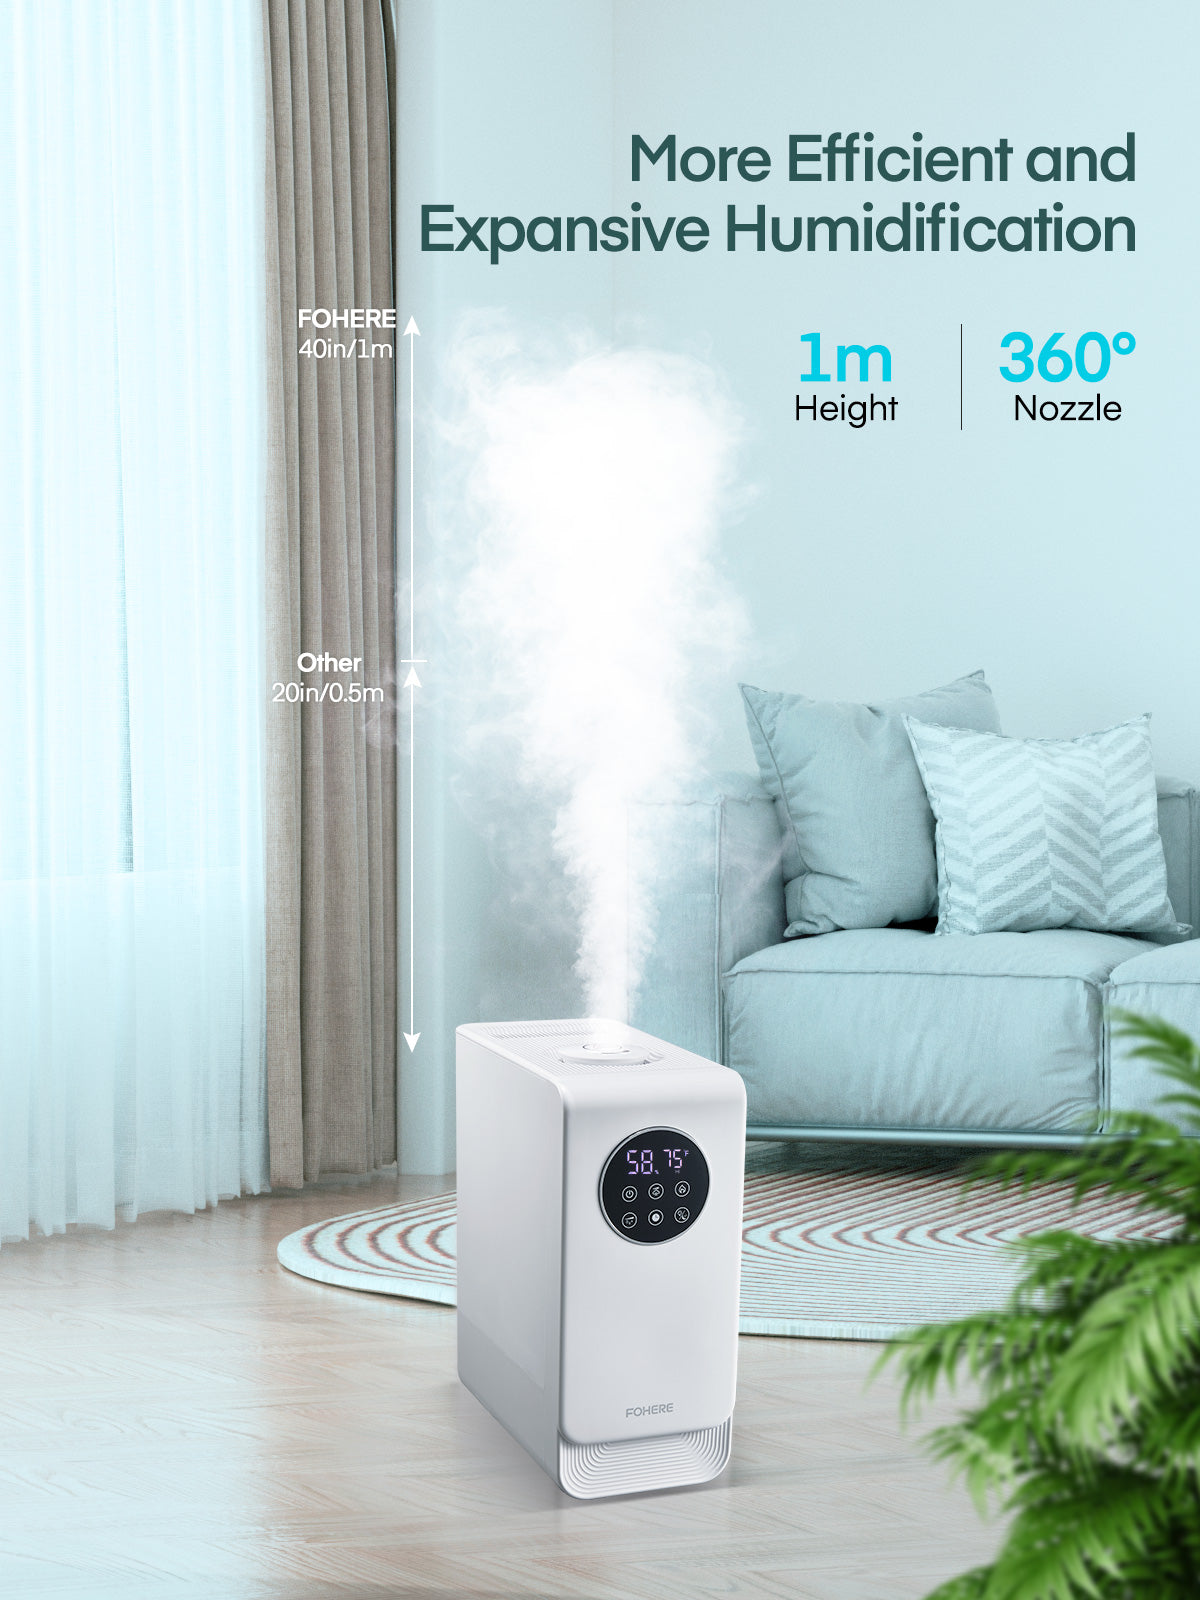 FOHERE Humidifiers for Bedroom, 3.2L Top Fill Cool Mist Ultrasonic Humidifier for Baby Rooms and Plants, 2-IN-1 Essential Oil Diffuser with 7-color Light and Auto Shut-off, BPA-Free, Quiet, White